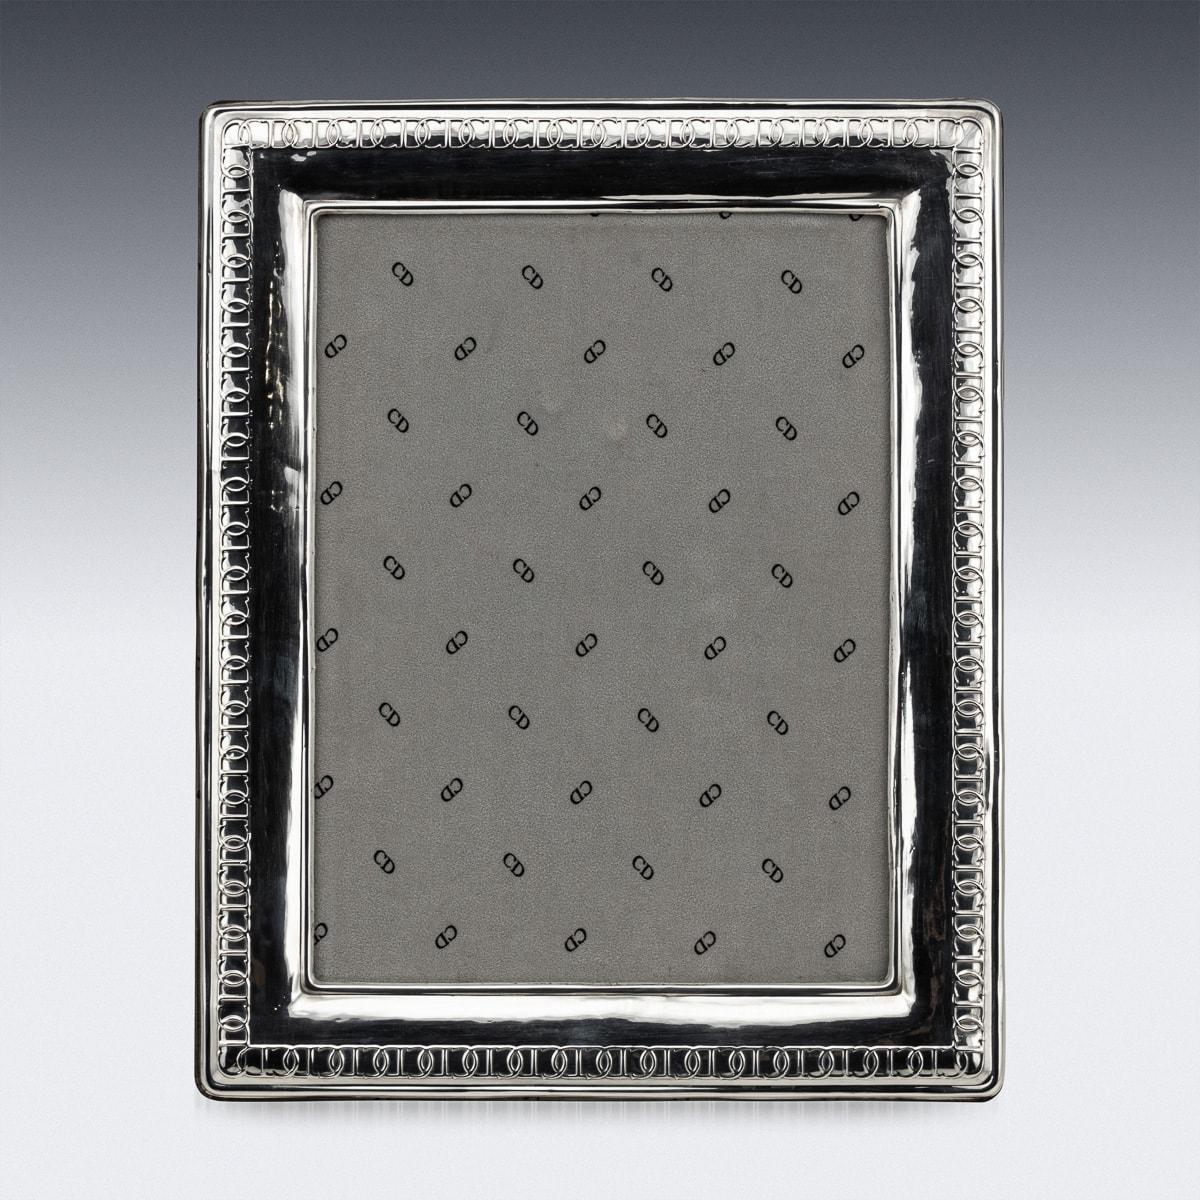 A vintage mid-20th Century French picture frame designed and crafted by the world renowned fashion house Christian Dior. Its embossed 